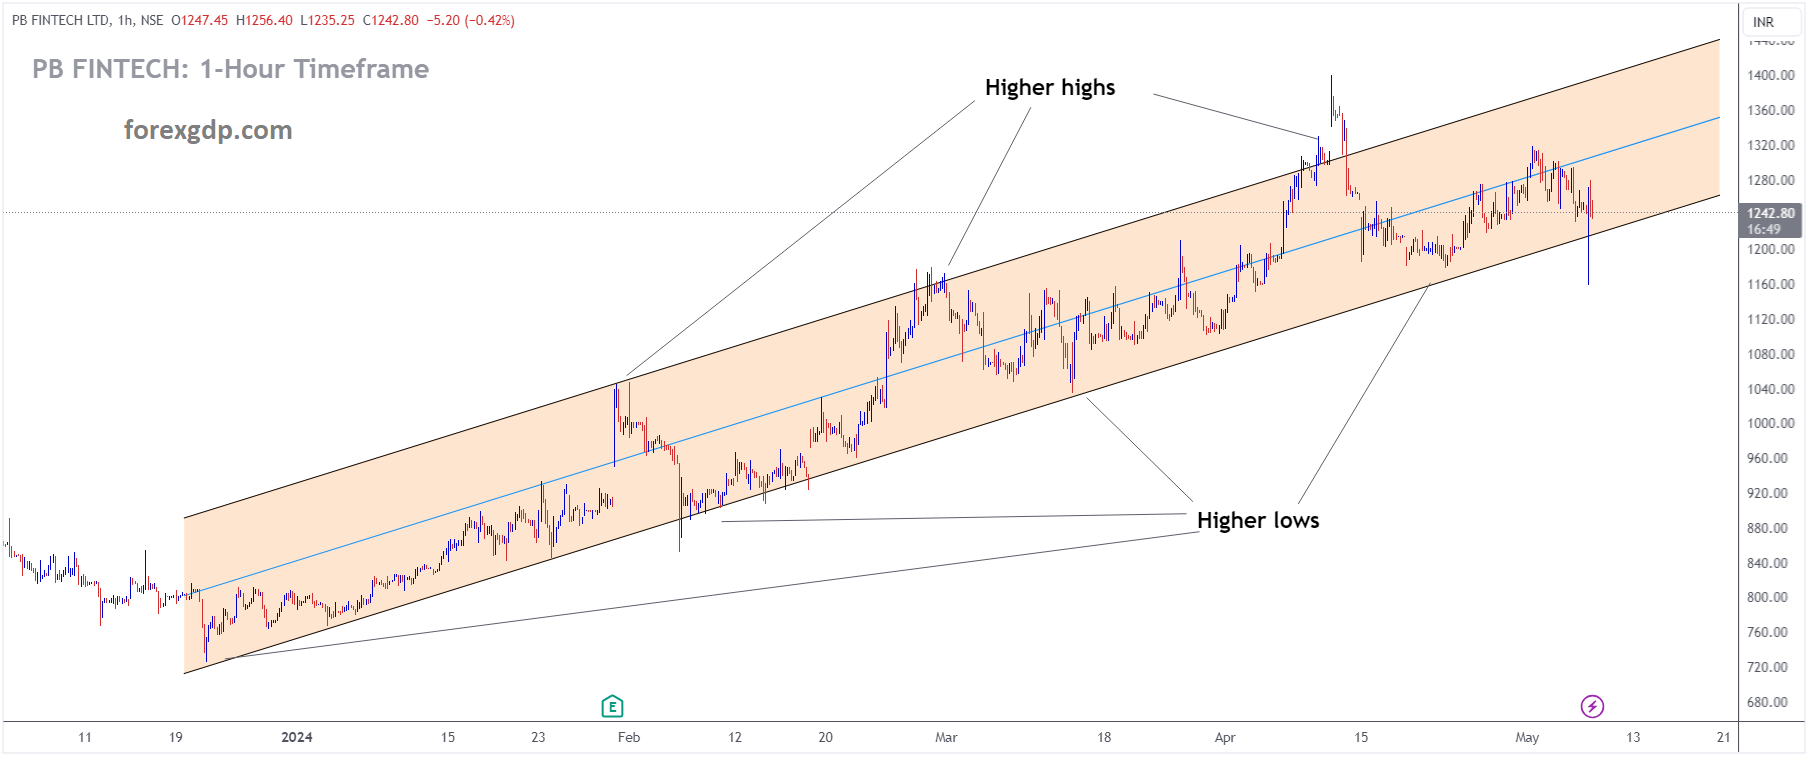 PB FINTECH Market price is moving in Ascending channel and market has reached higher low area of the channel